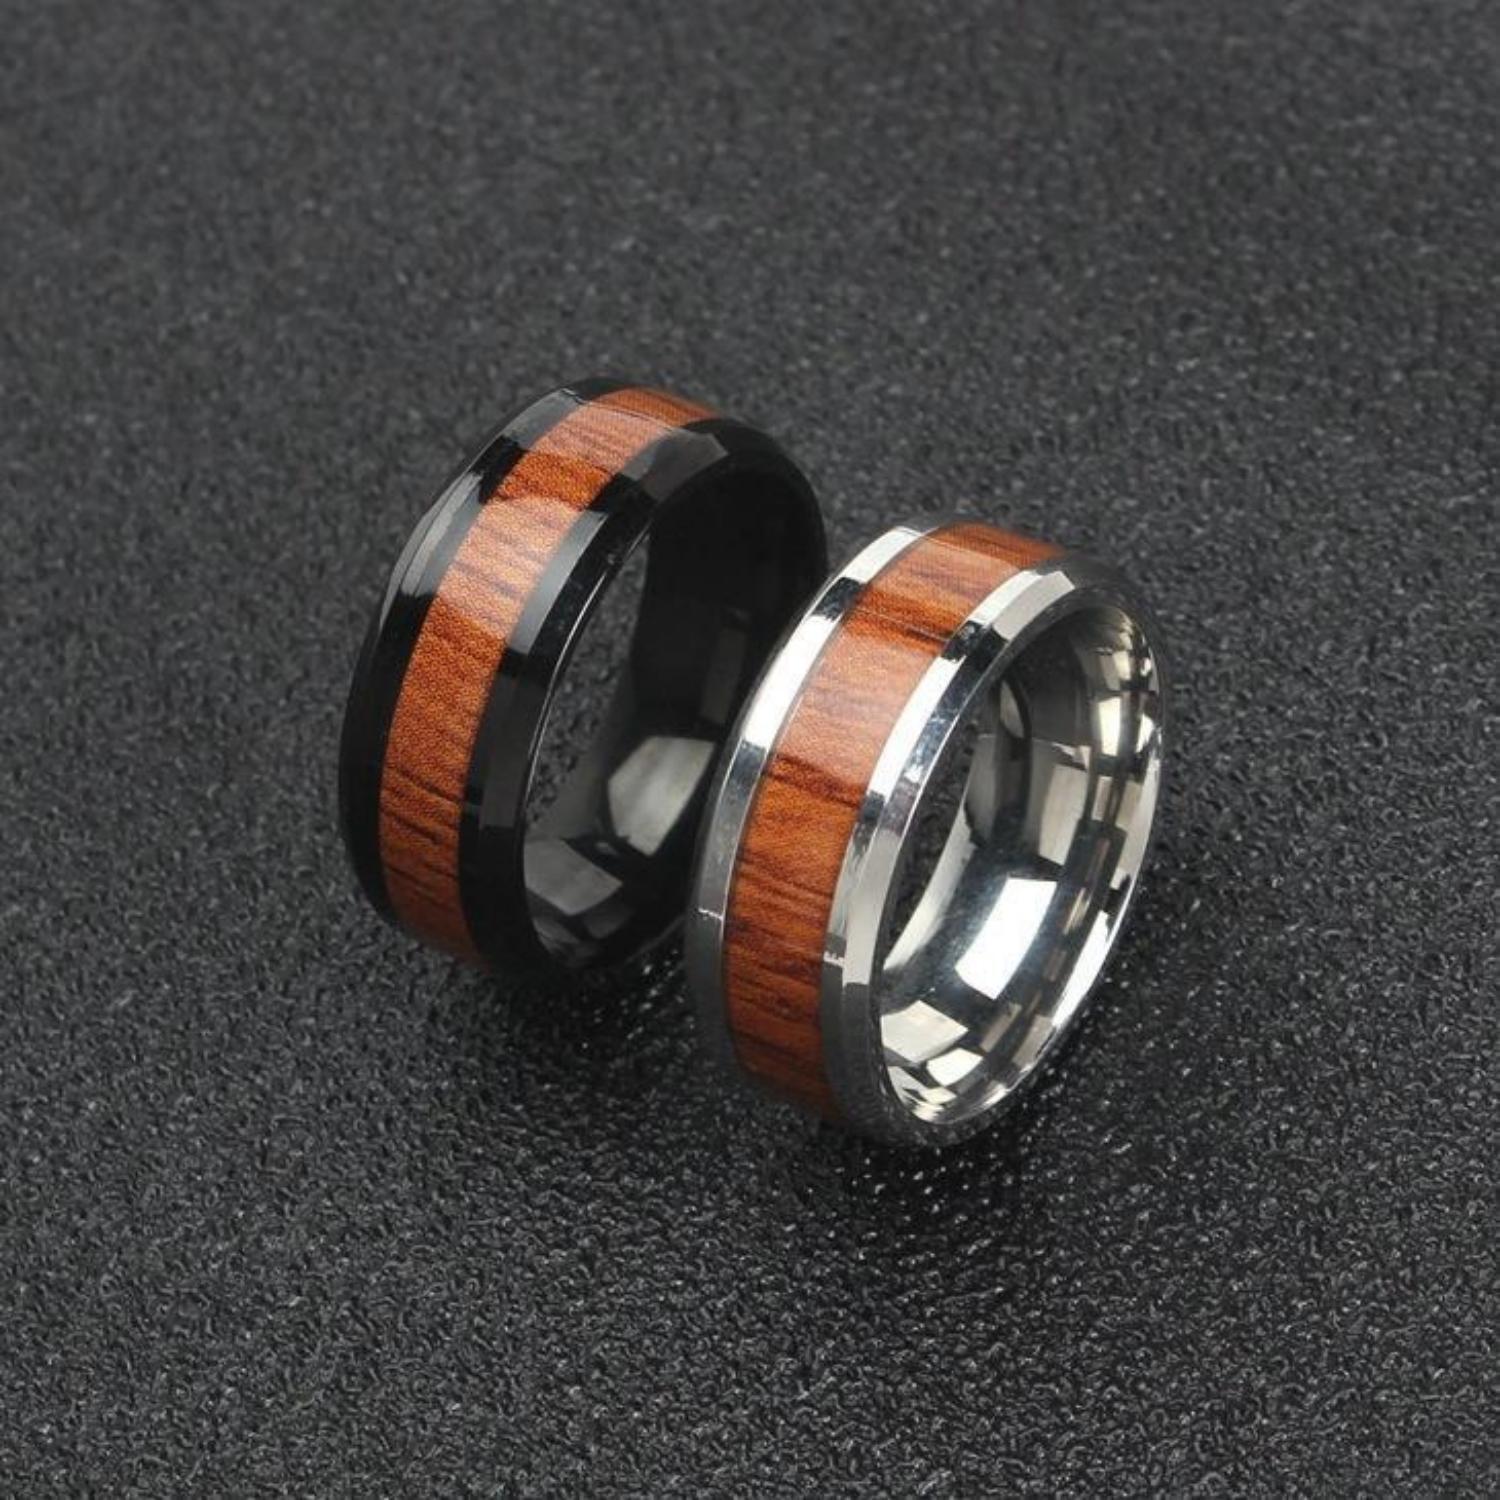 Personalized Wooden Rings For Couples In Titanium - CoupleSets